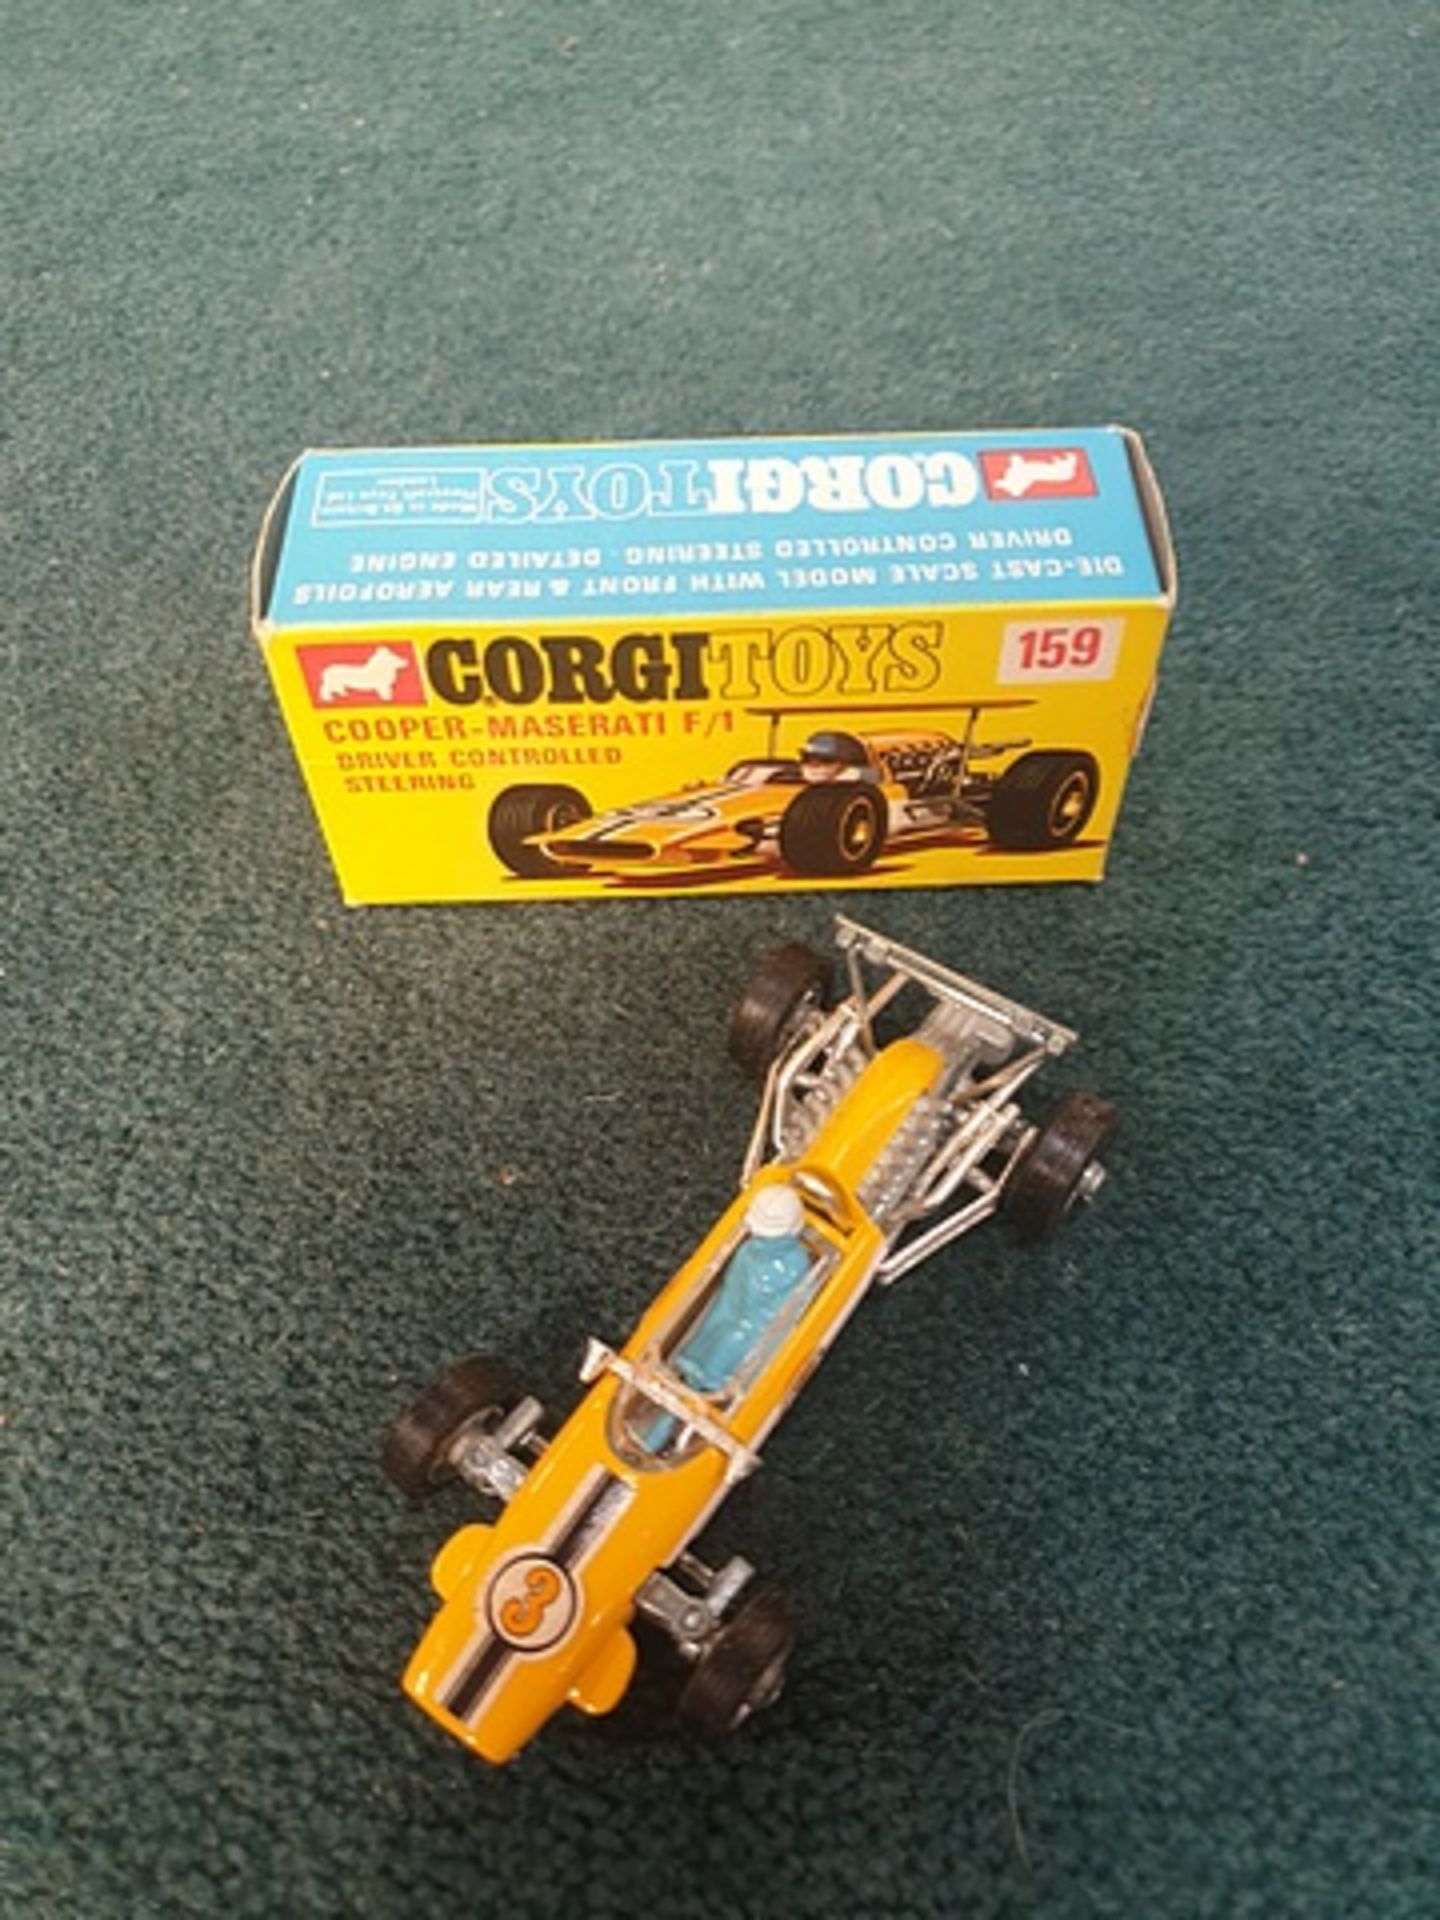 Corgi Toys # 159 Cooper Maserati F/1 With Driver Controlled Steering In Yellow Complete With Box